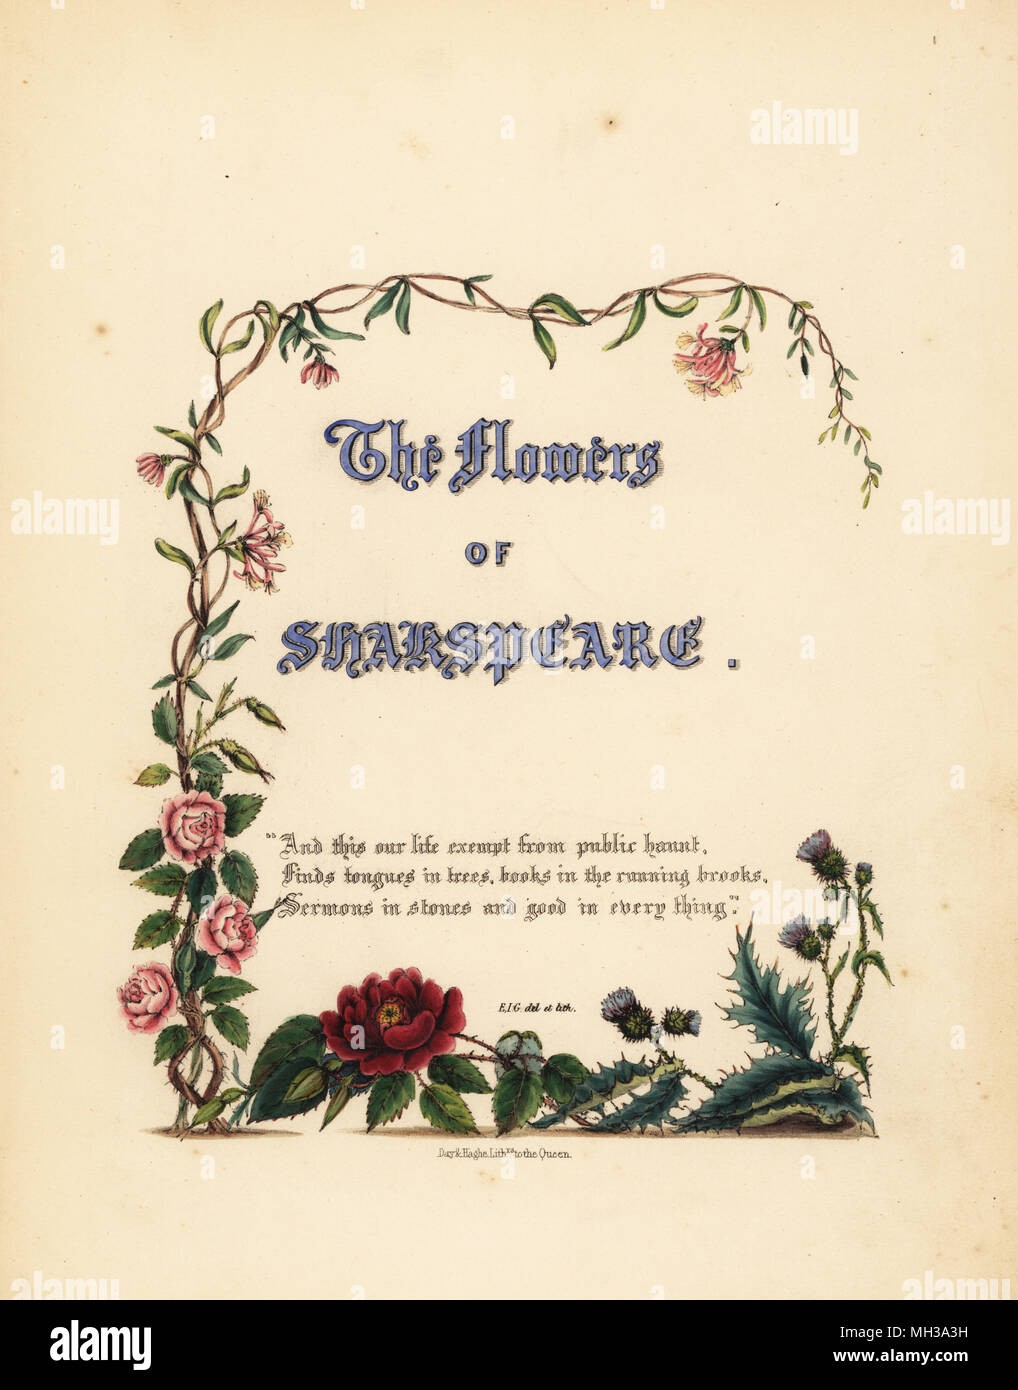 Title page with calligraphic title Flowers of Shakspeare and vignette of roses, honeysuckle and thistles. Handcoioured botanical illustration drawn and lithographed by Jane Elizabeth Giraud from The Flowers of Shakespeare, Day and Haghe, London, 1845. Stock Photo